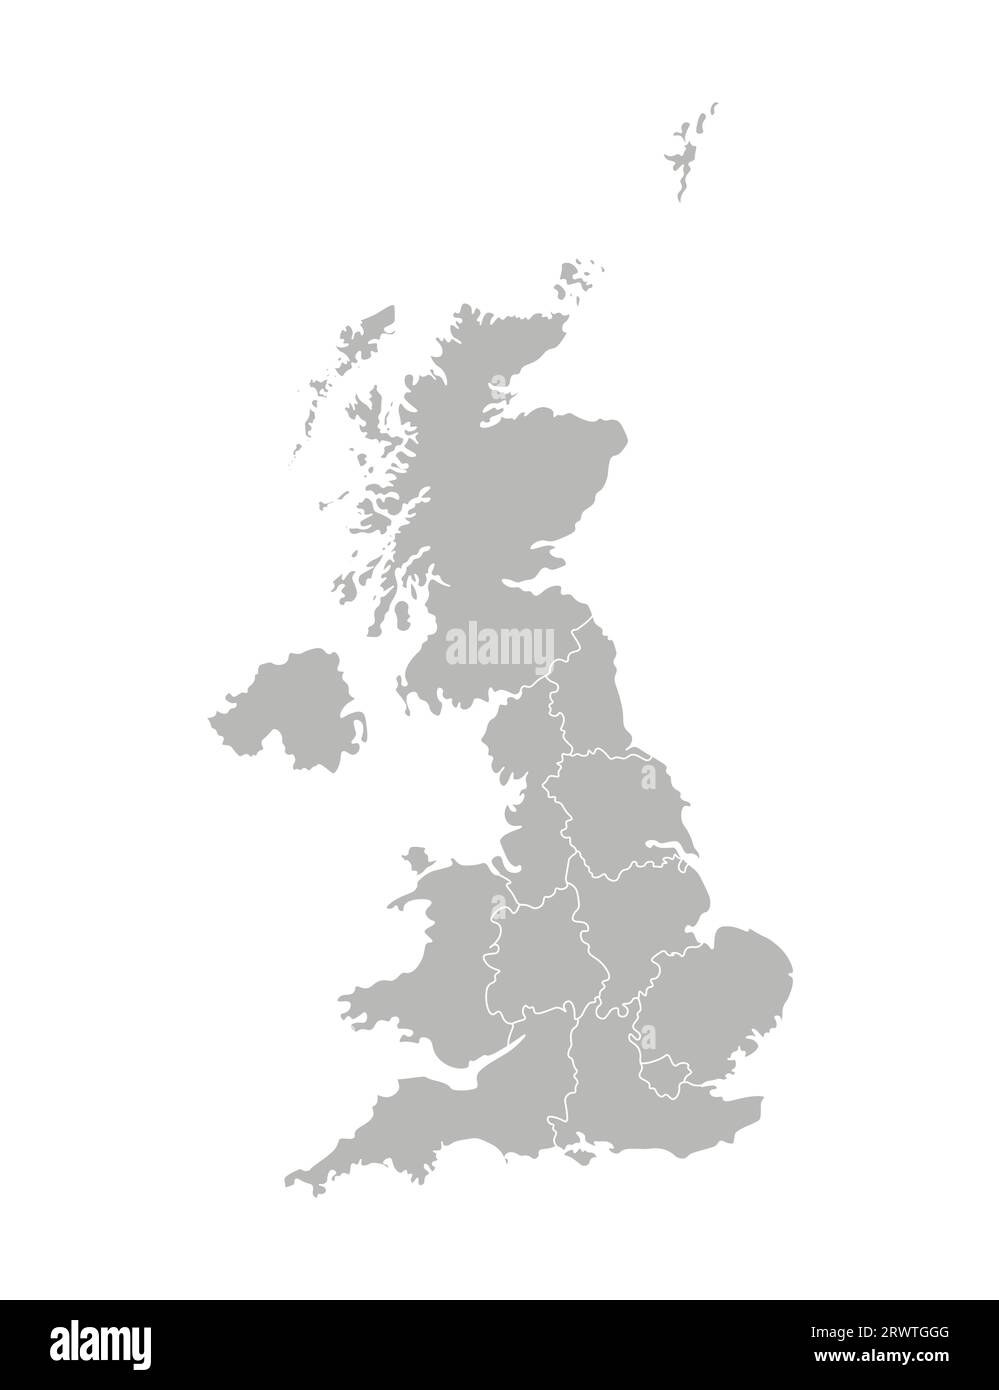 Vector isolated illustration of simplified administrative map of the United Kingdom of Great Britain and Northern Ireland. Borders of the provinces re Stock Vector